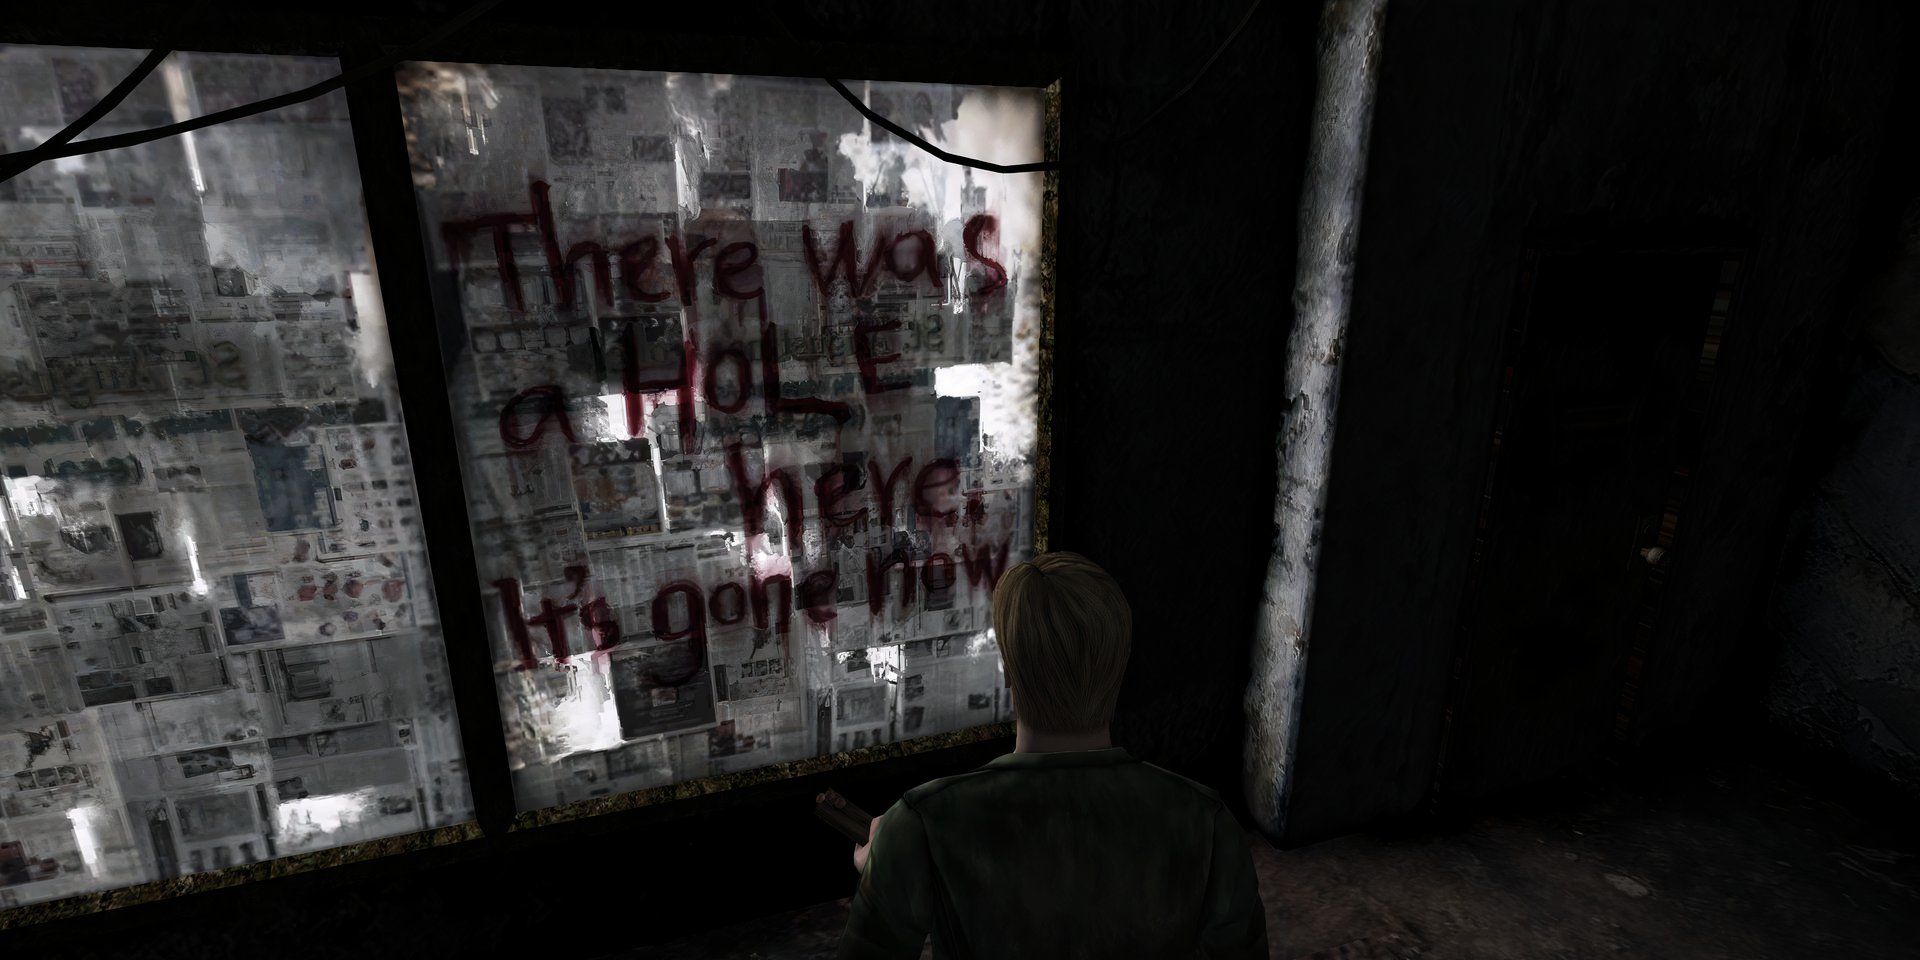 There was a hole here Silent Hill 2 graffiti